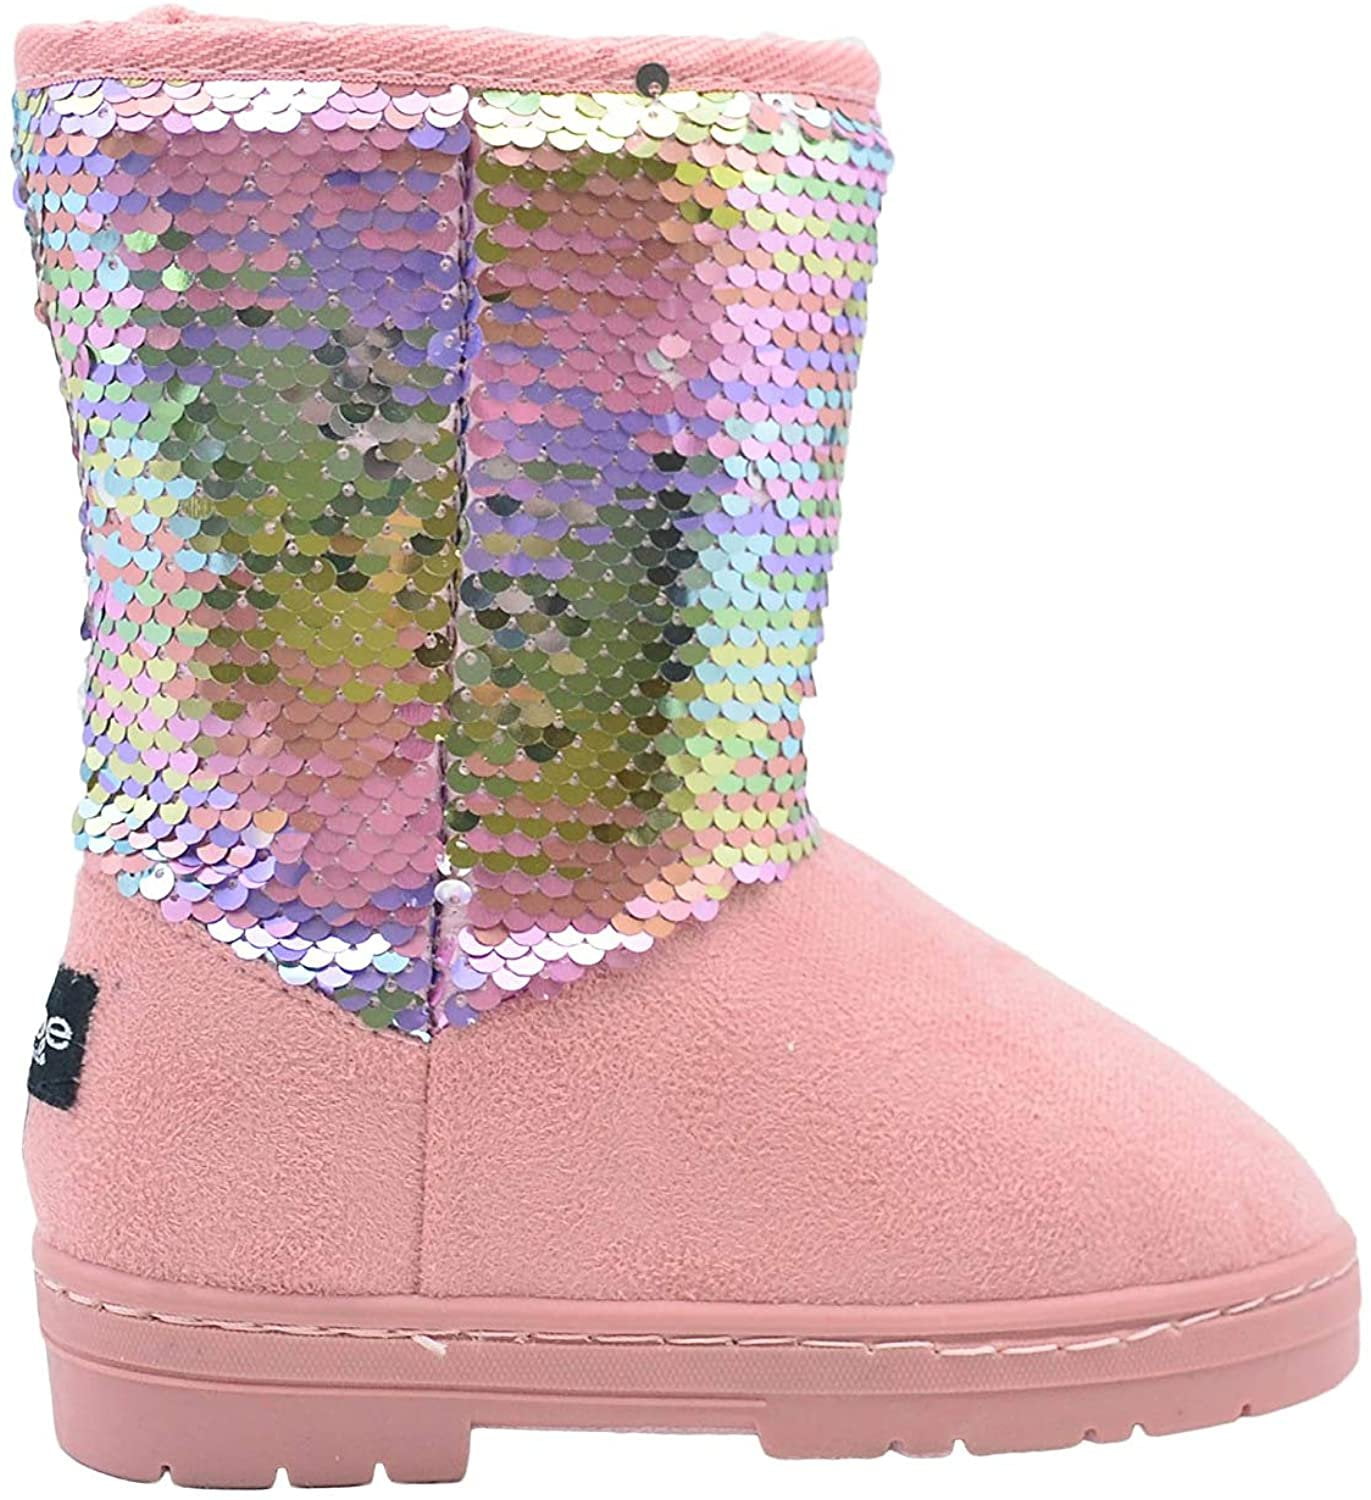 sparkly winter boots